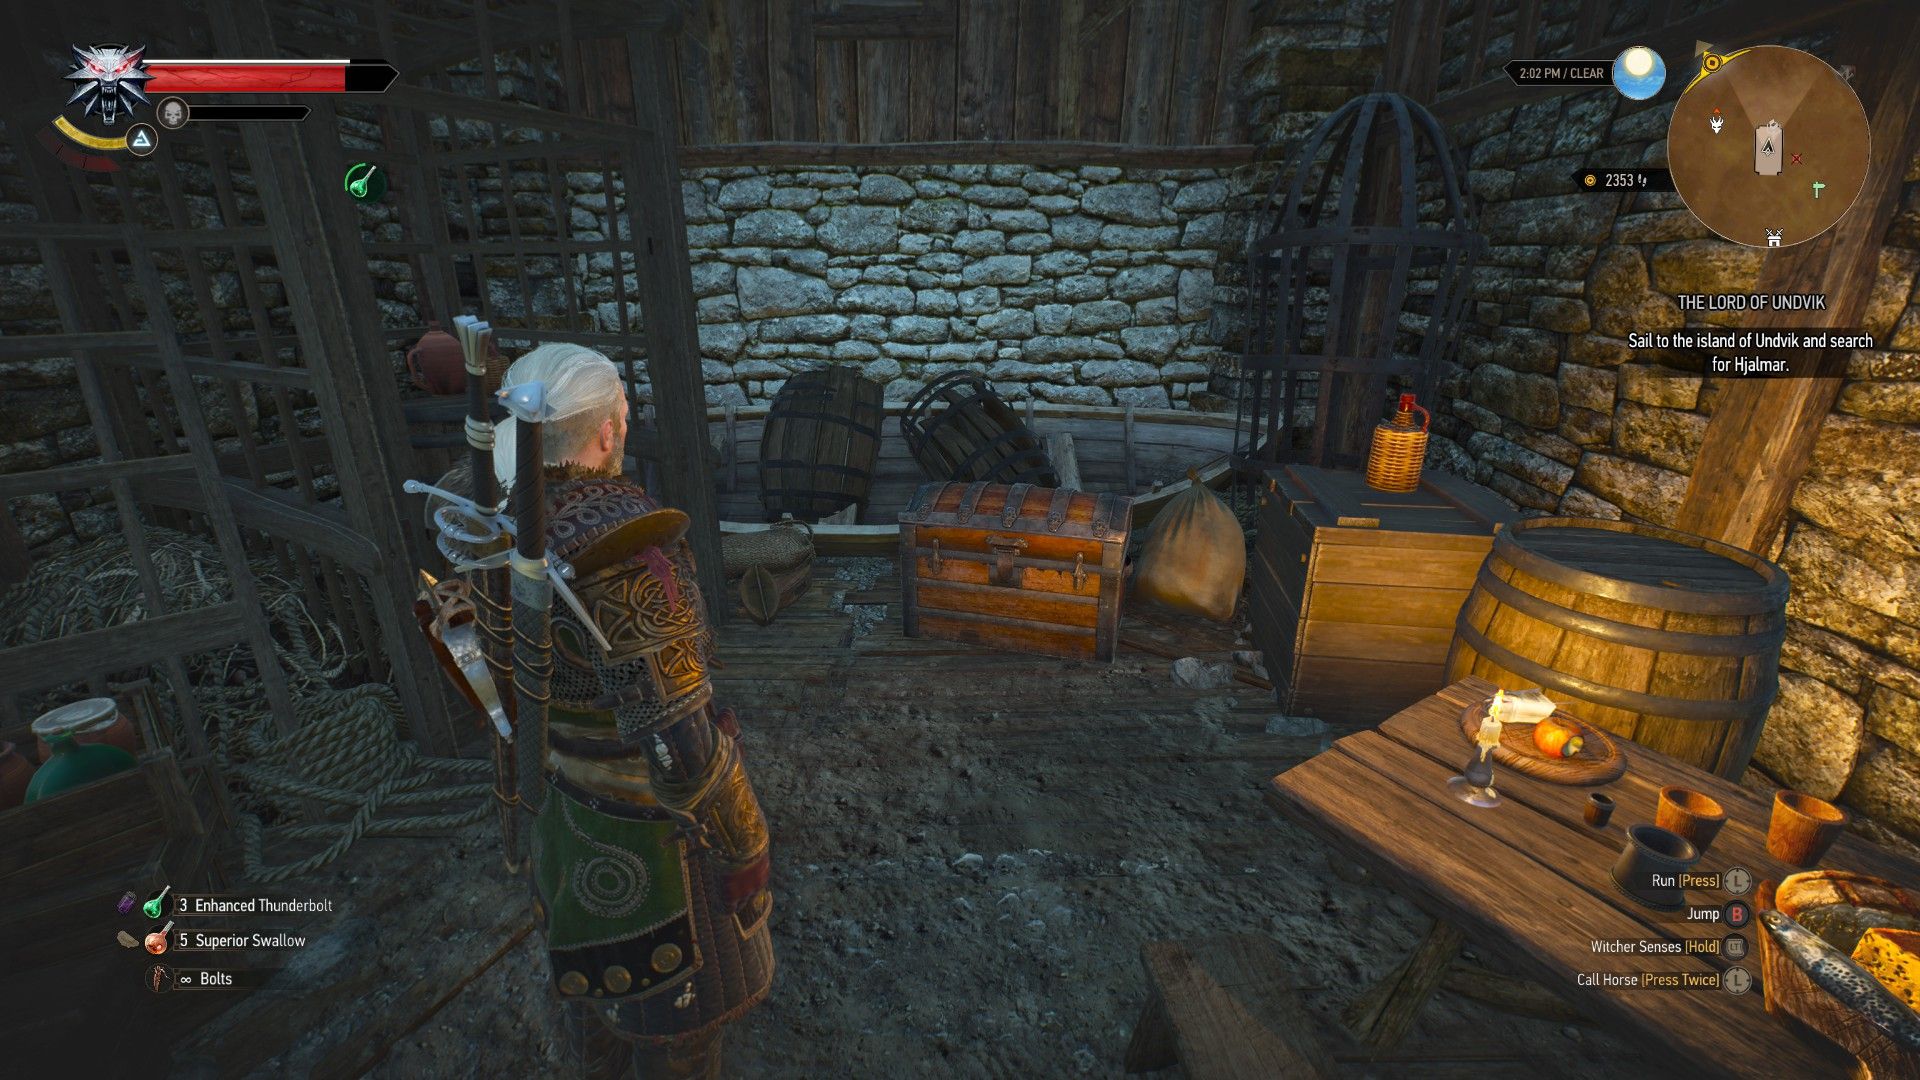 A screenshot of Geralt looking at a chest of letters in The Witcher 3.